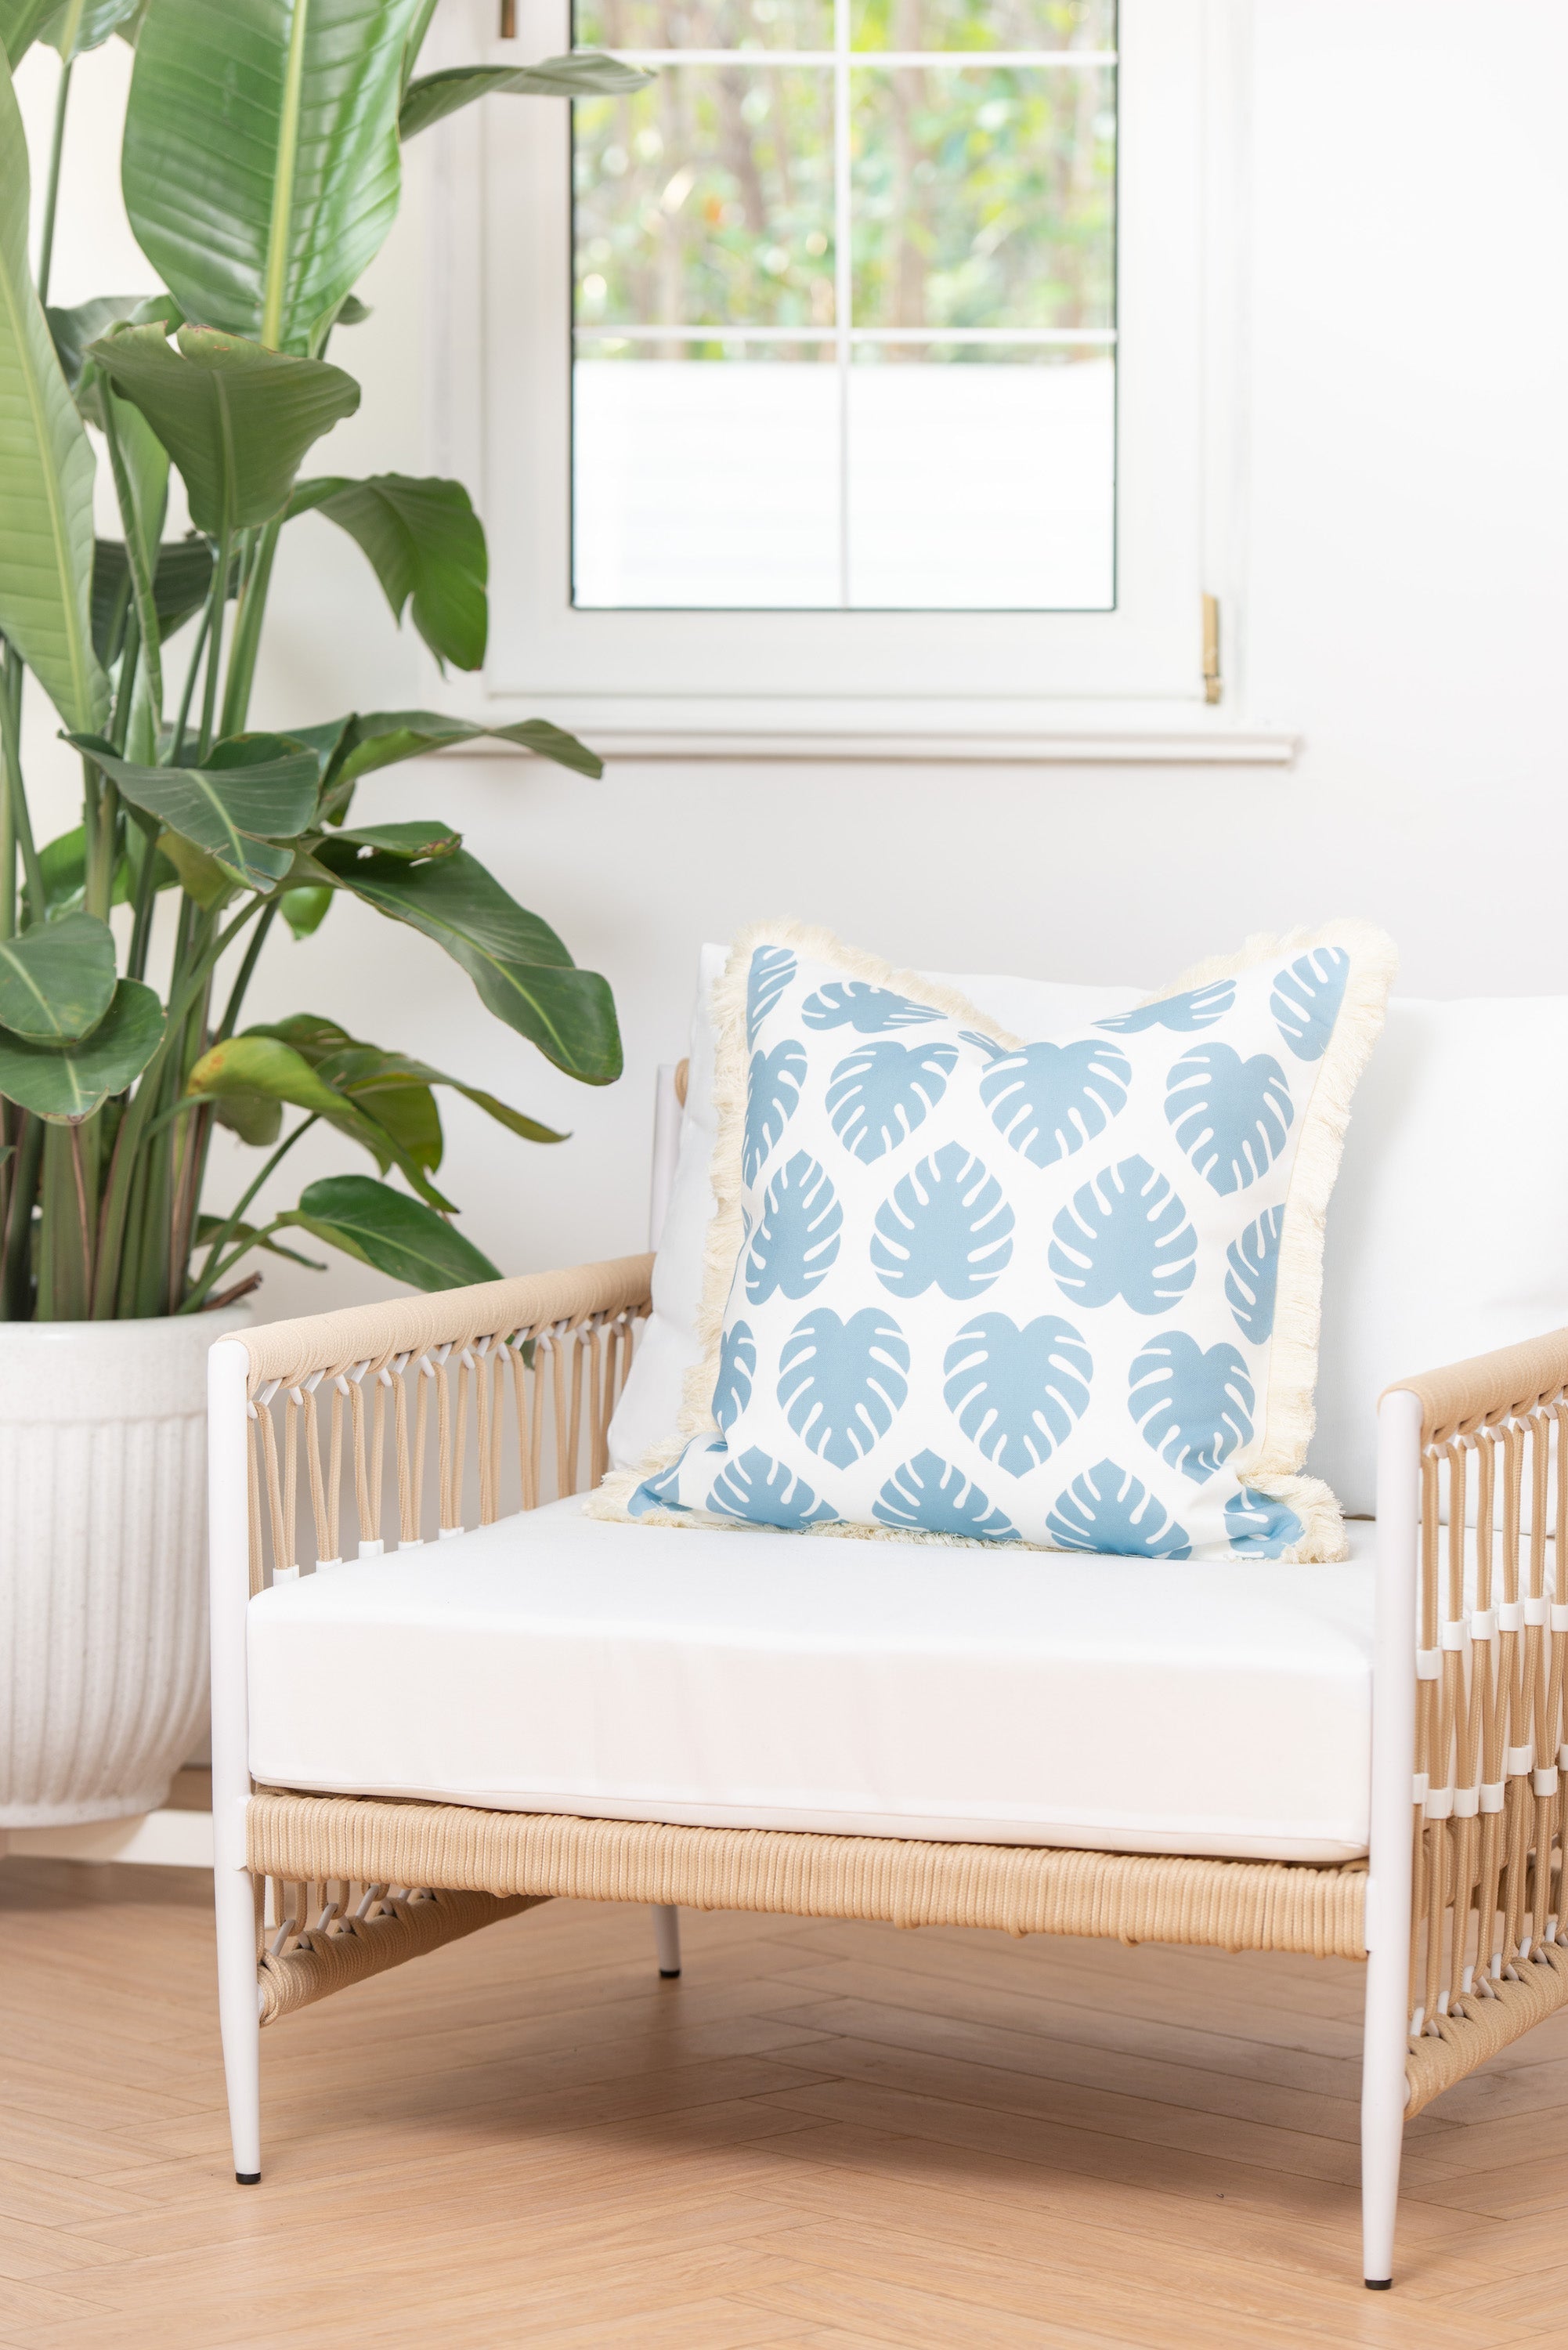 Coastal Hampton Style Indoor Outdoor Pillow Cover, Monstera Leaf Fringe, Baby Blue, 20"x20"